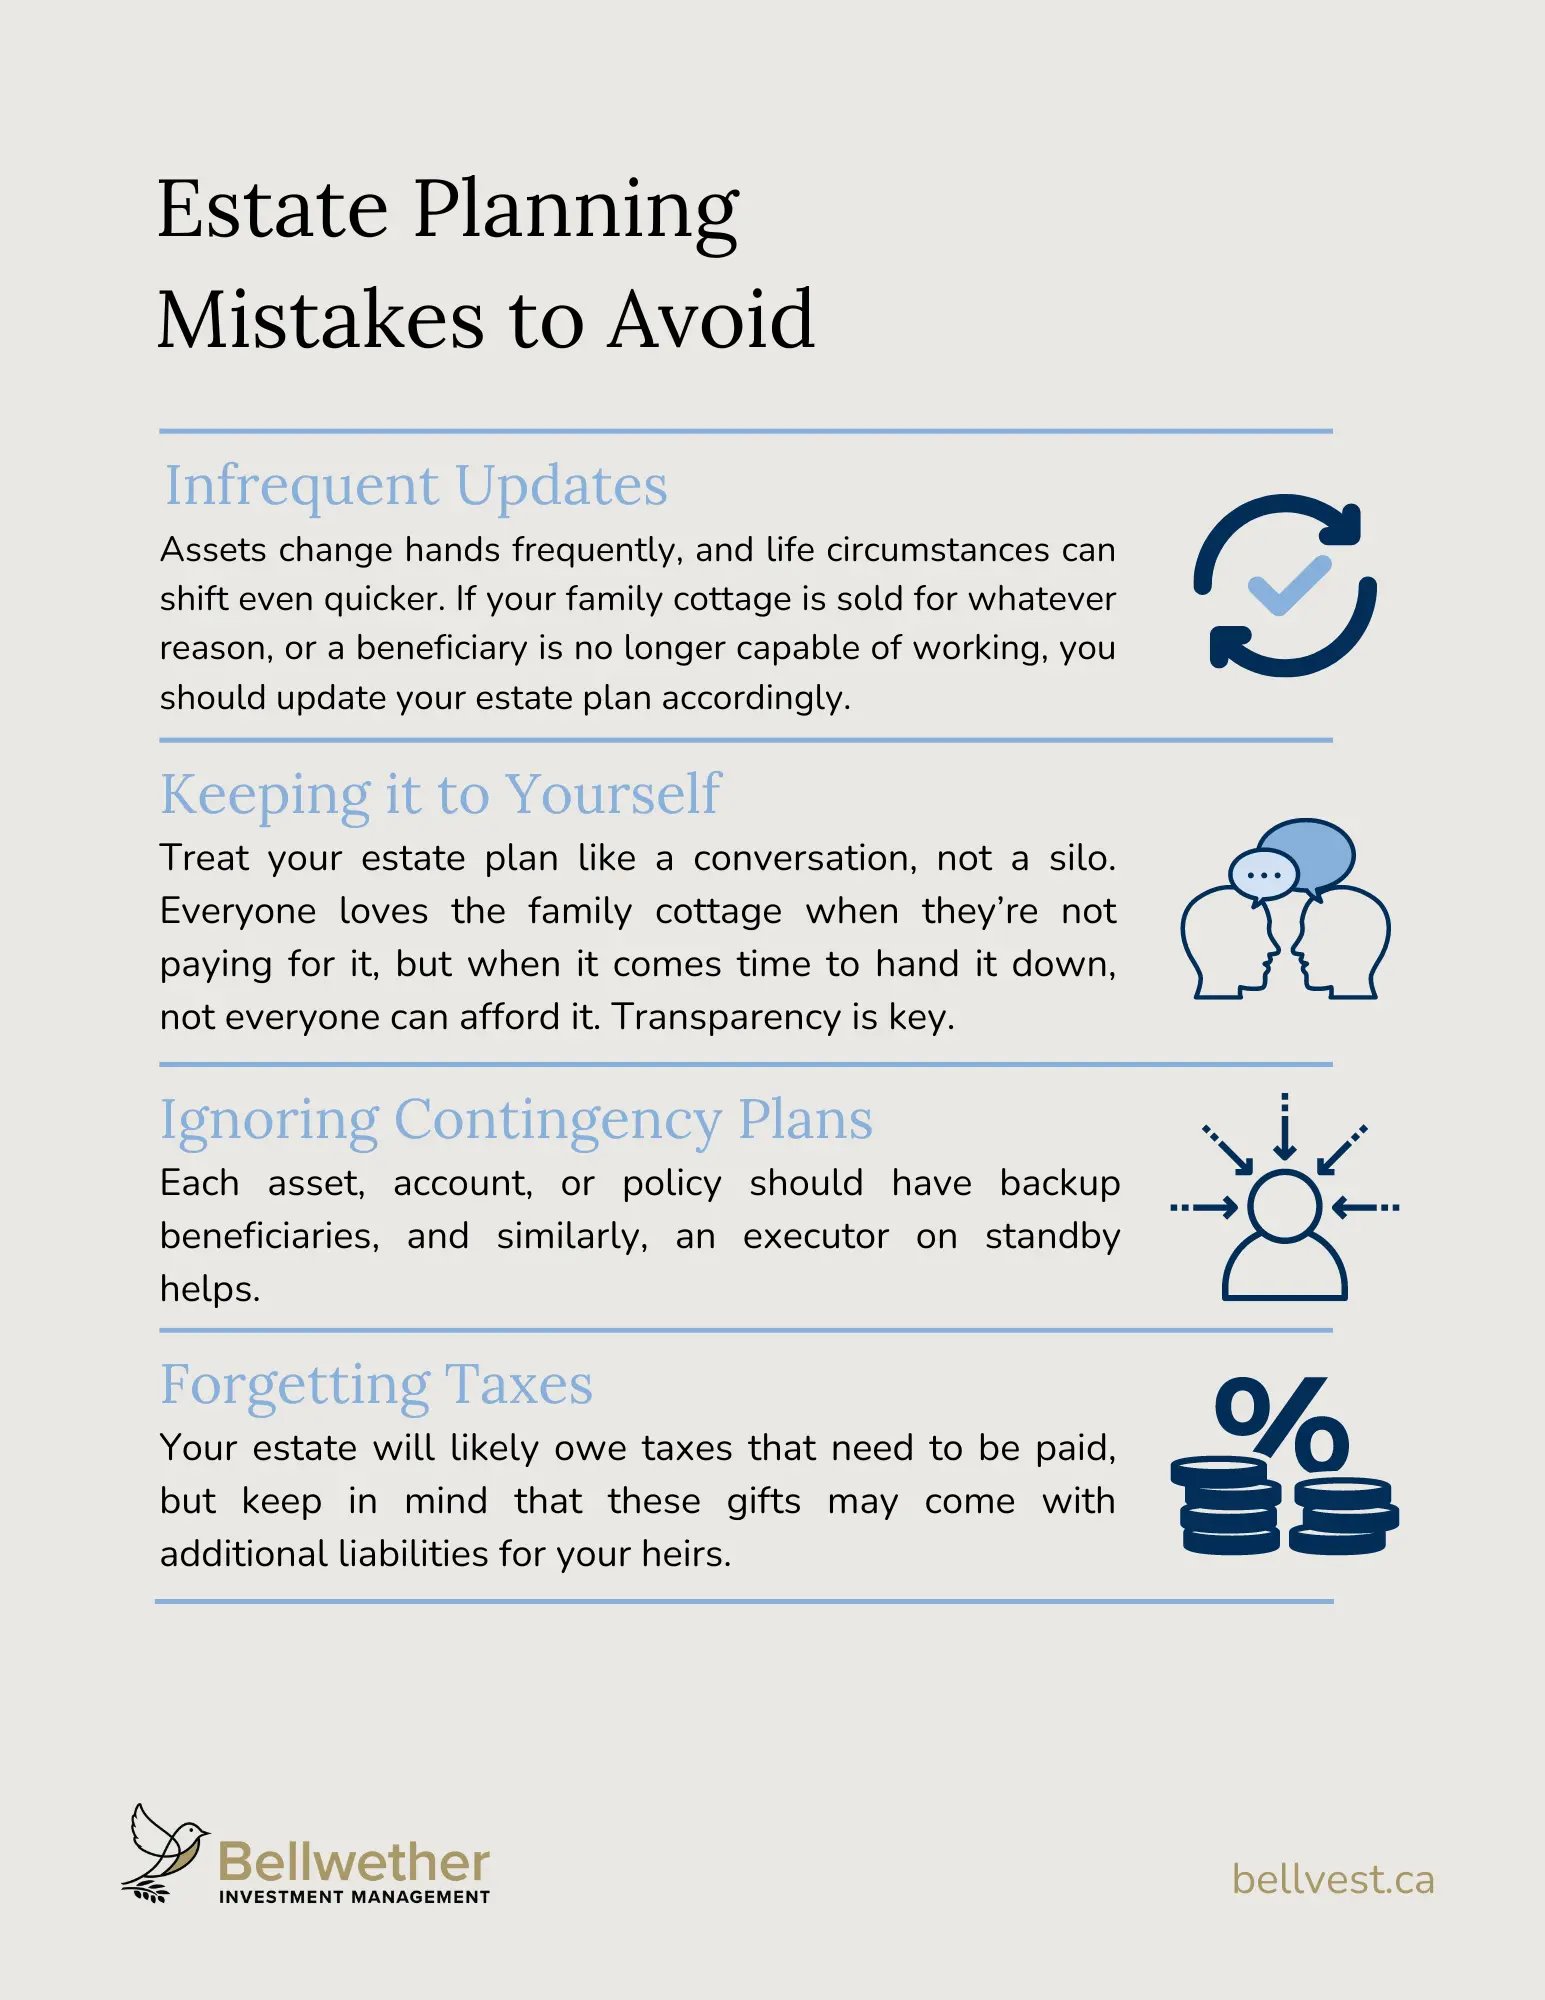 Four examples of common estate planning mistakes and ways to address them.